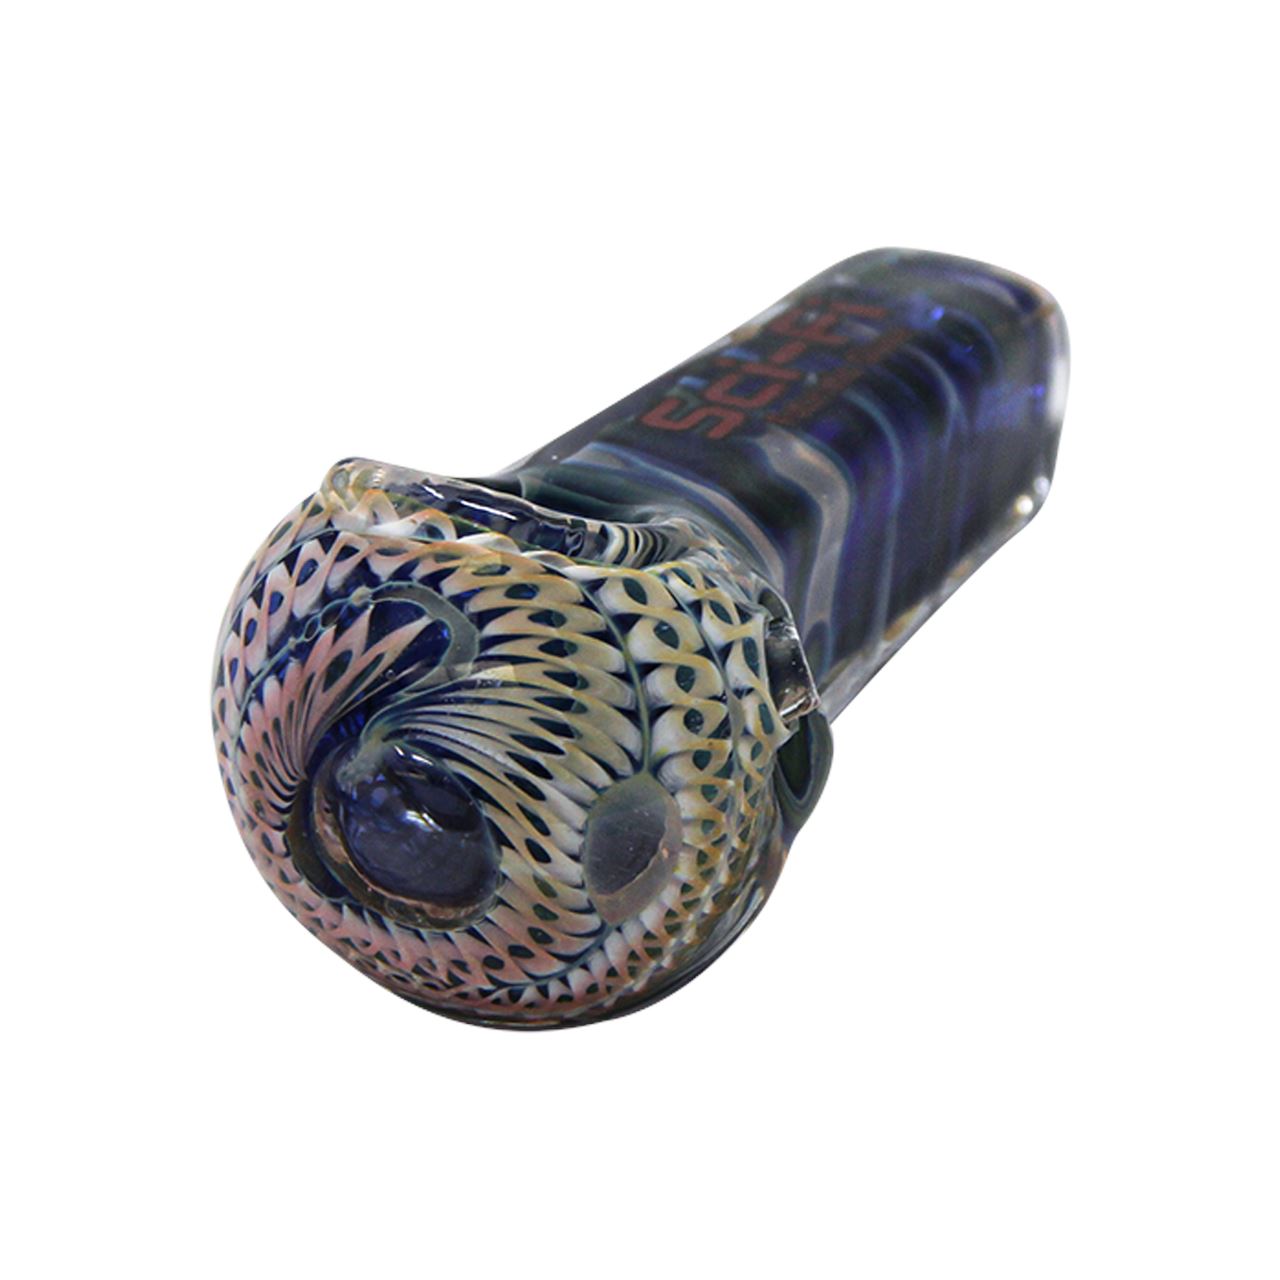 Sci Fi Heavy Thick Glass Design BX15 Hand Pipes - (1 Count) Flower Power Packages 